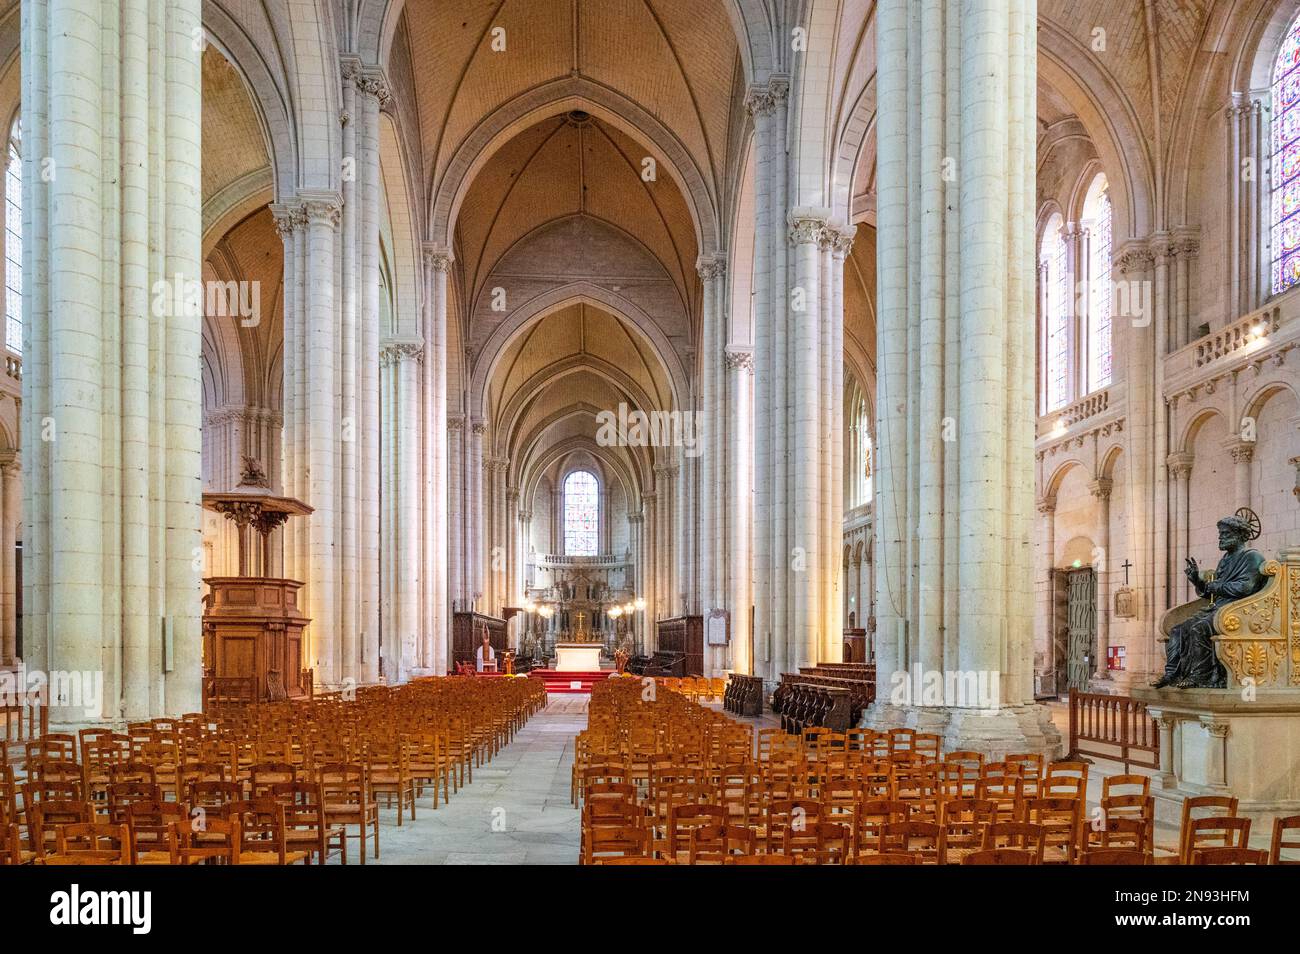 Interior of the early Gothic hall church Cathédrale Saint-Pierre in Poitiers, France Stock Photo